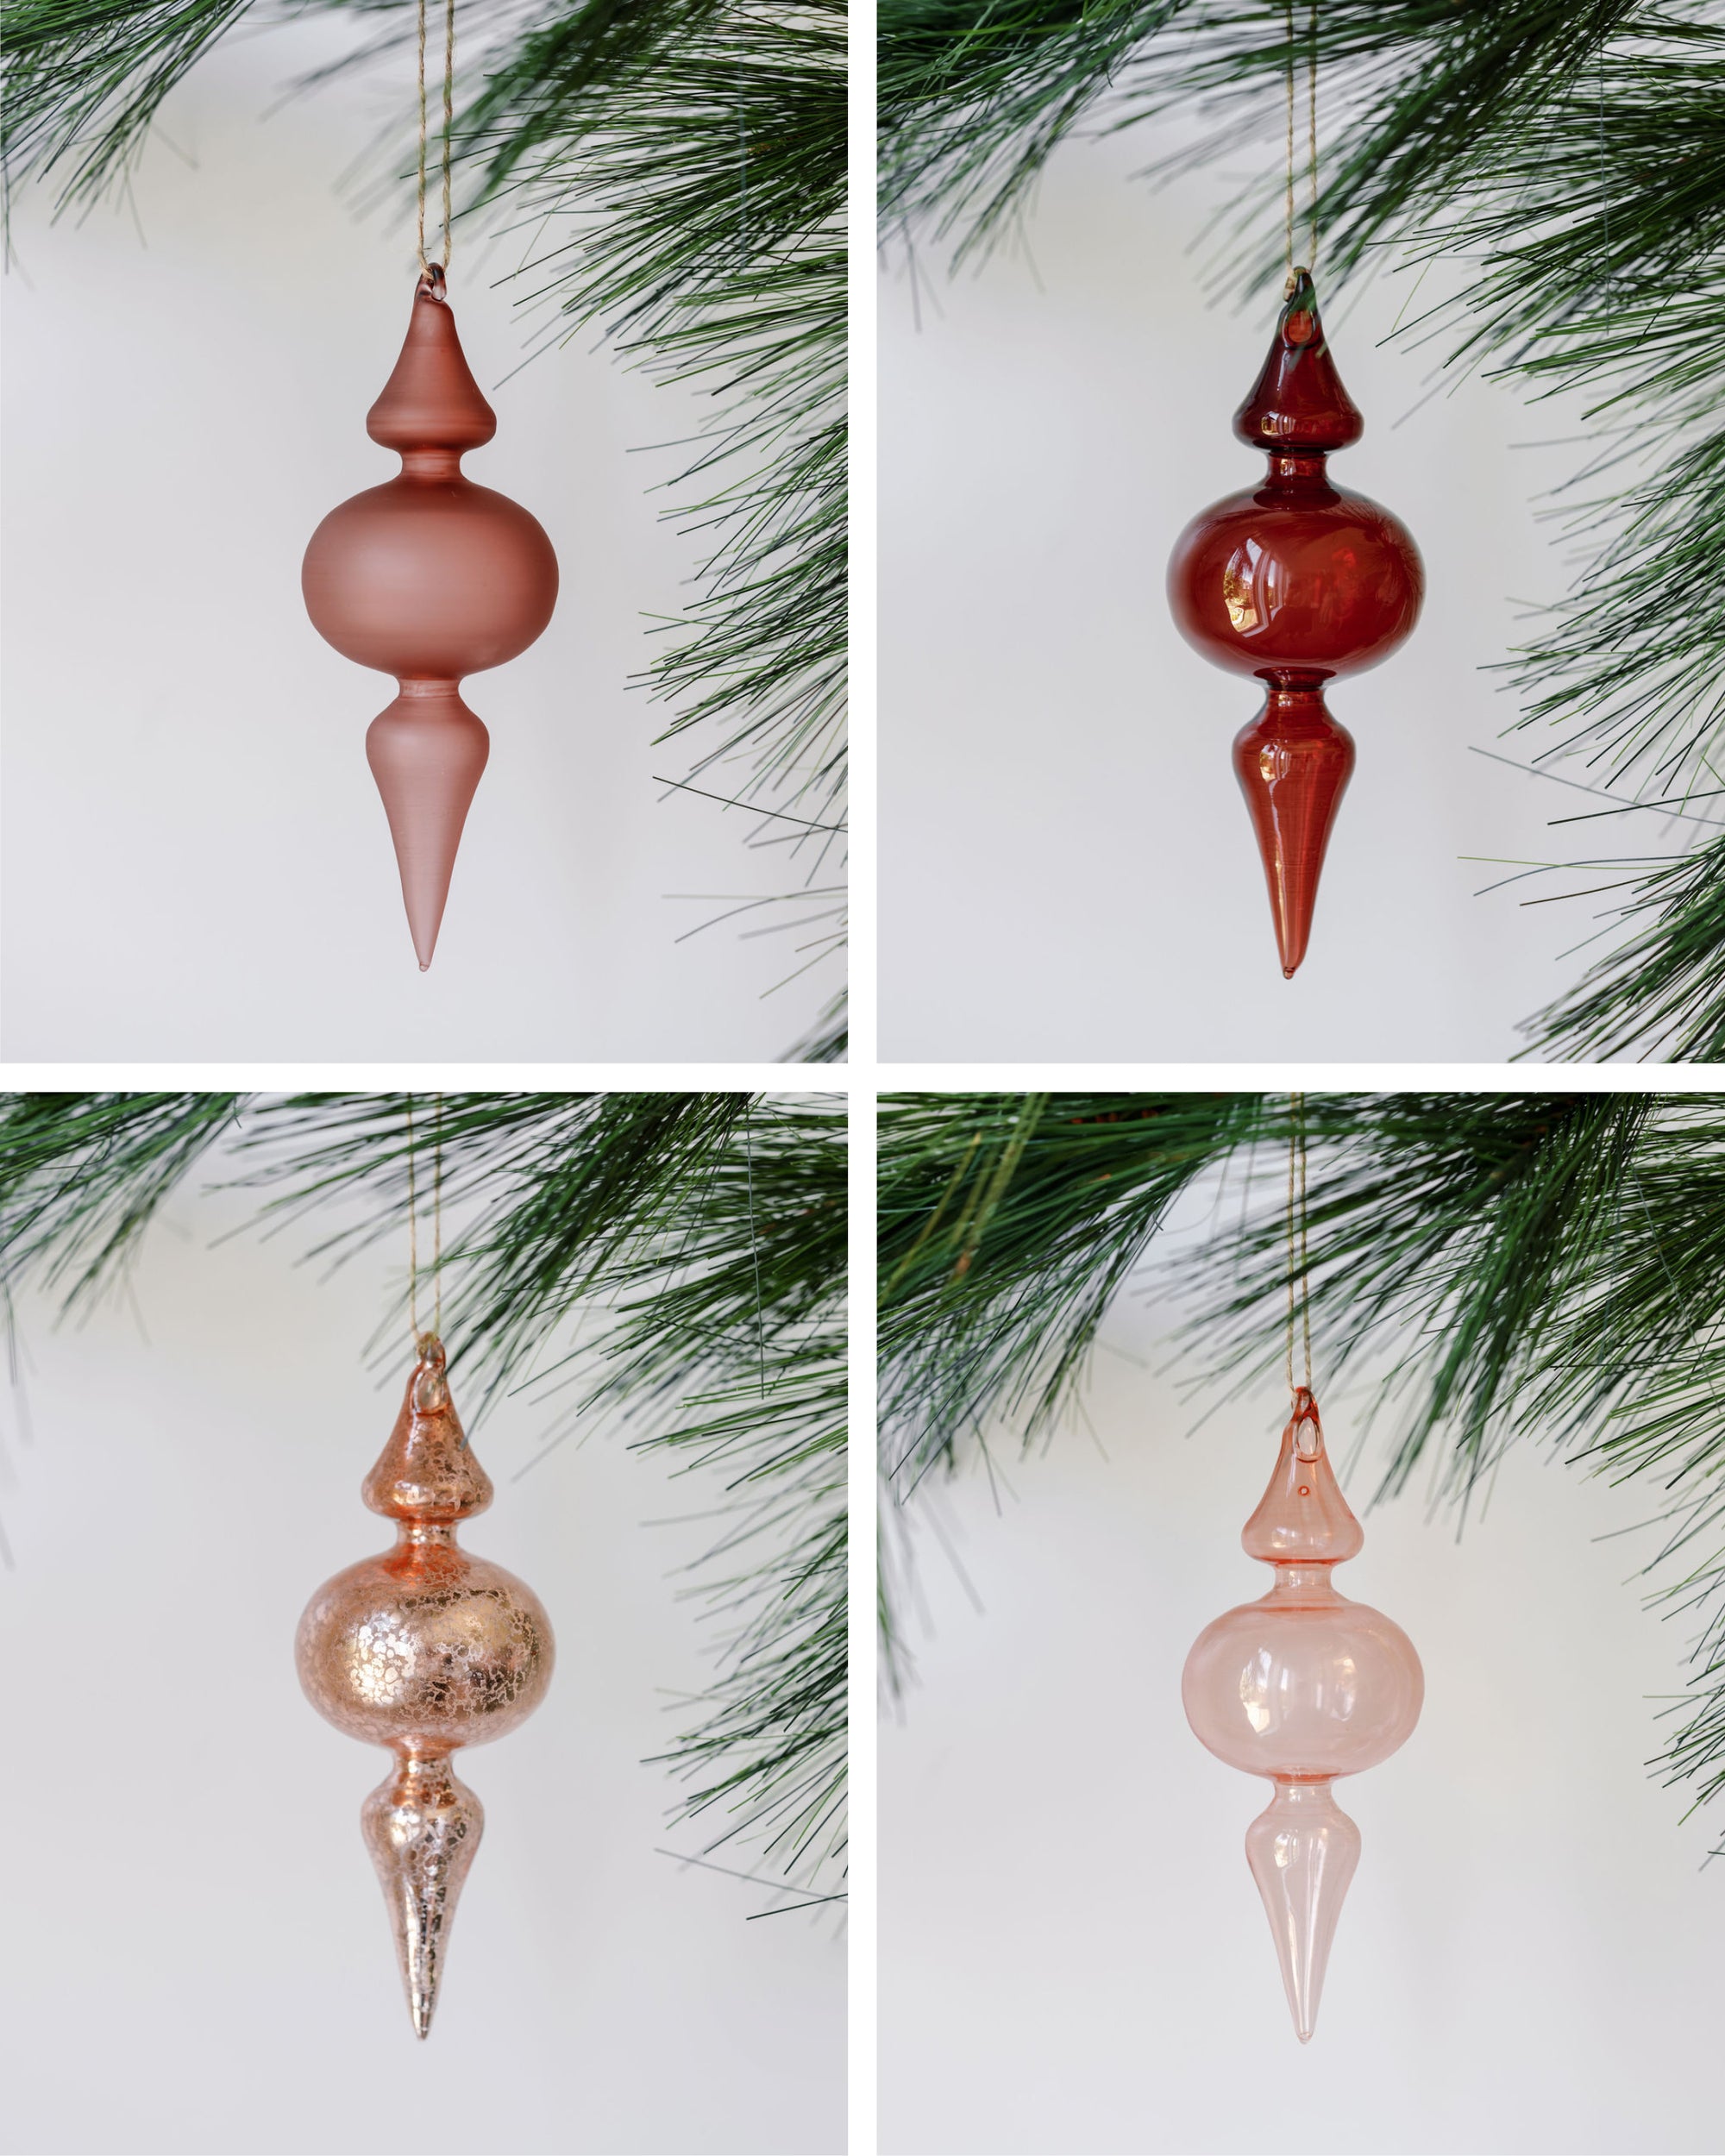 An images of all 4 colors in finial set